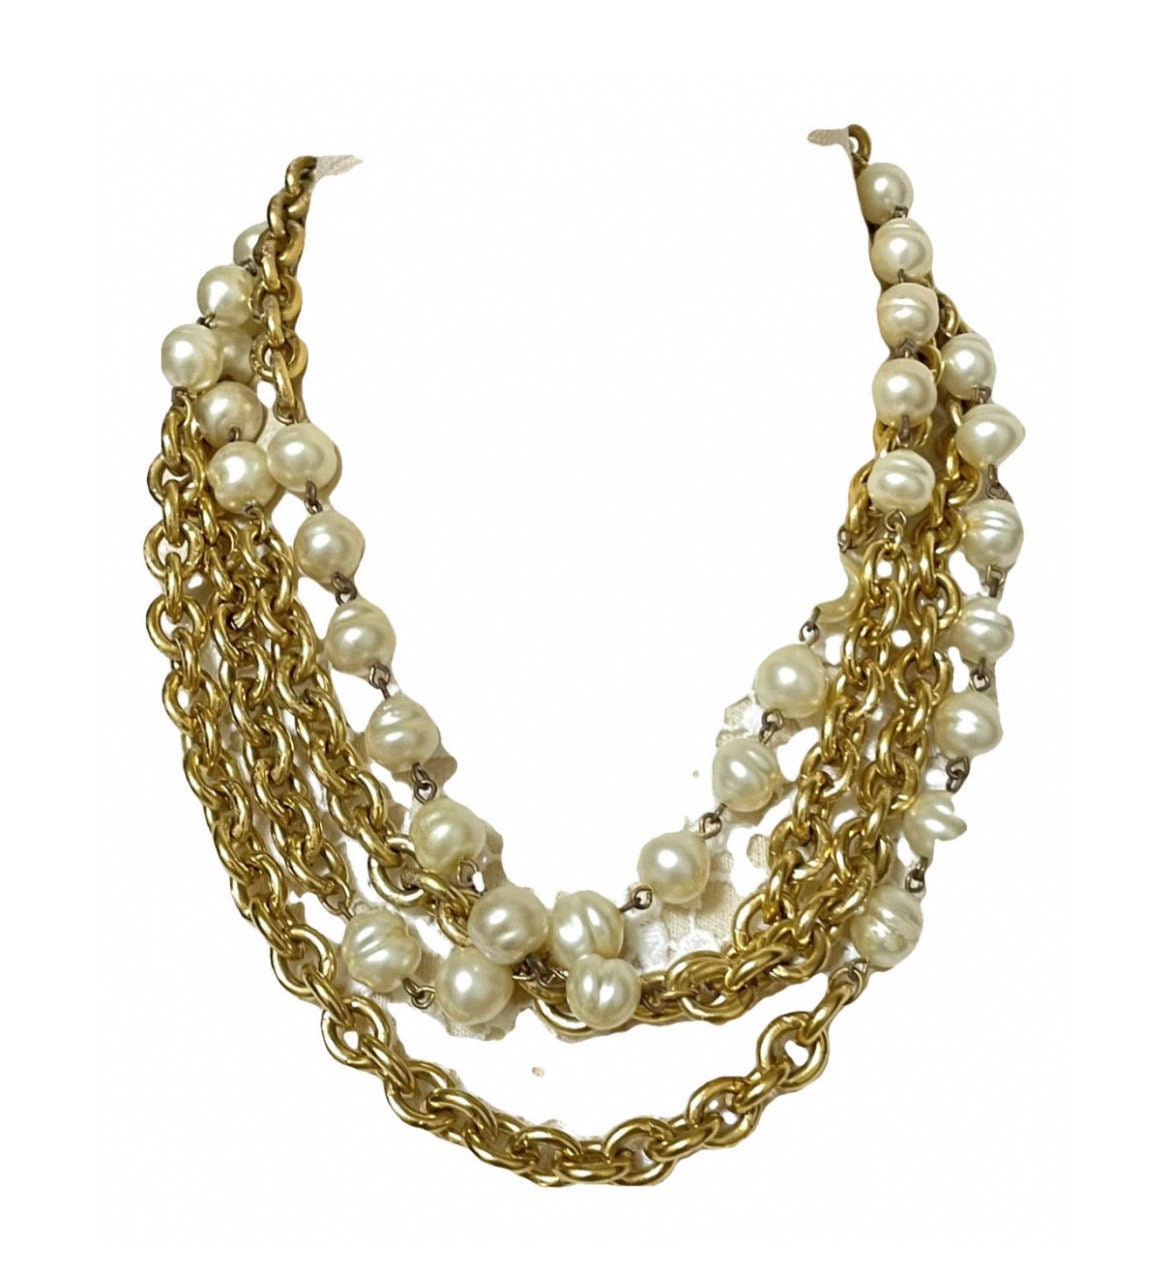 Vintage CHANEL Double Chain Necklace With Round Faux Pearls. 